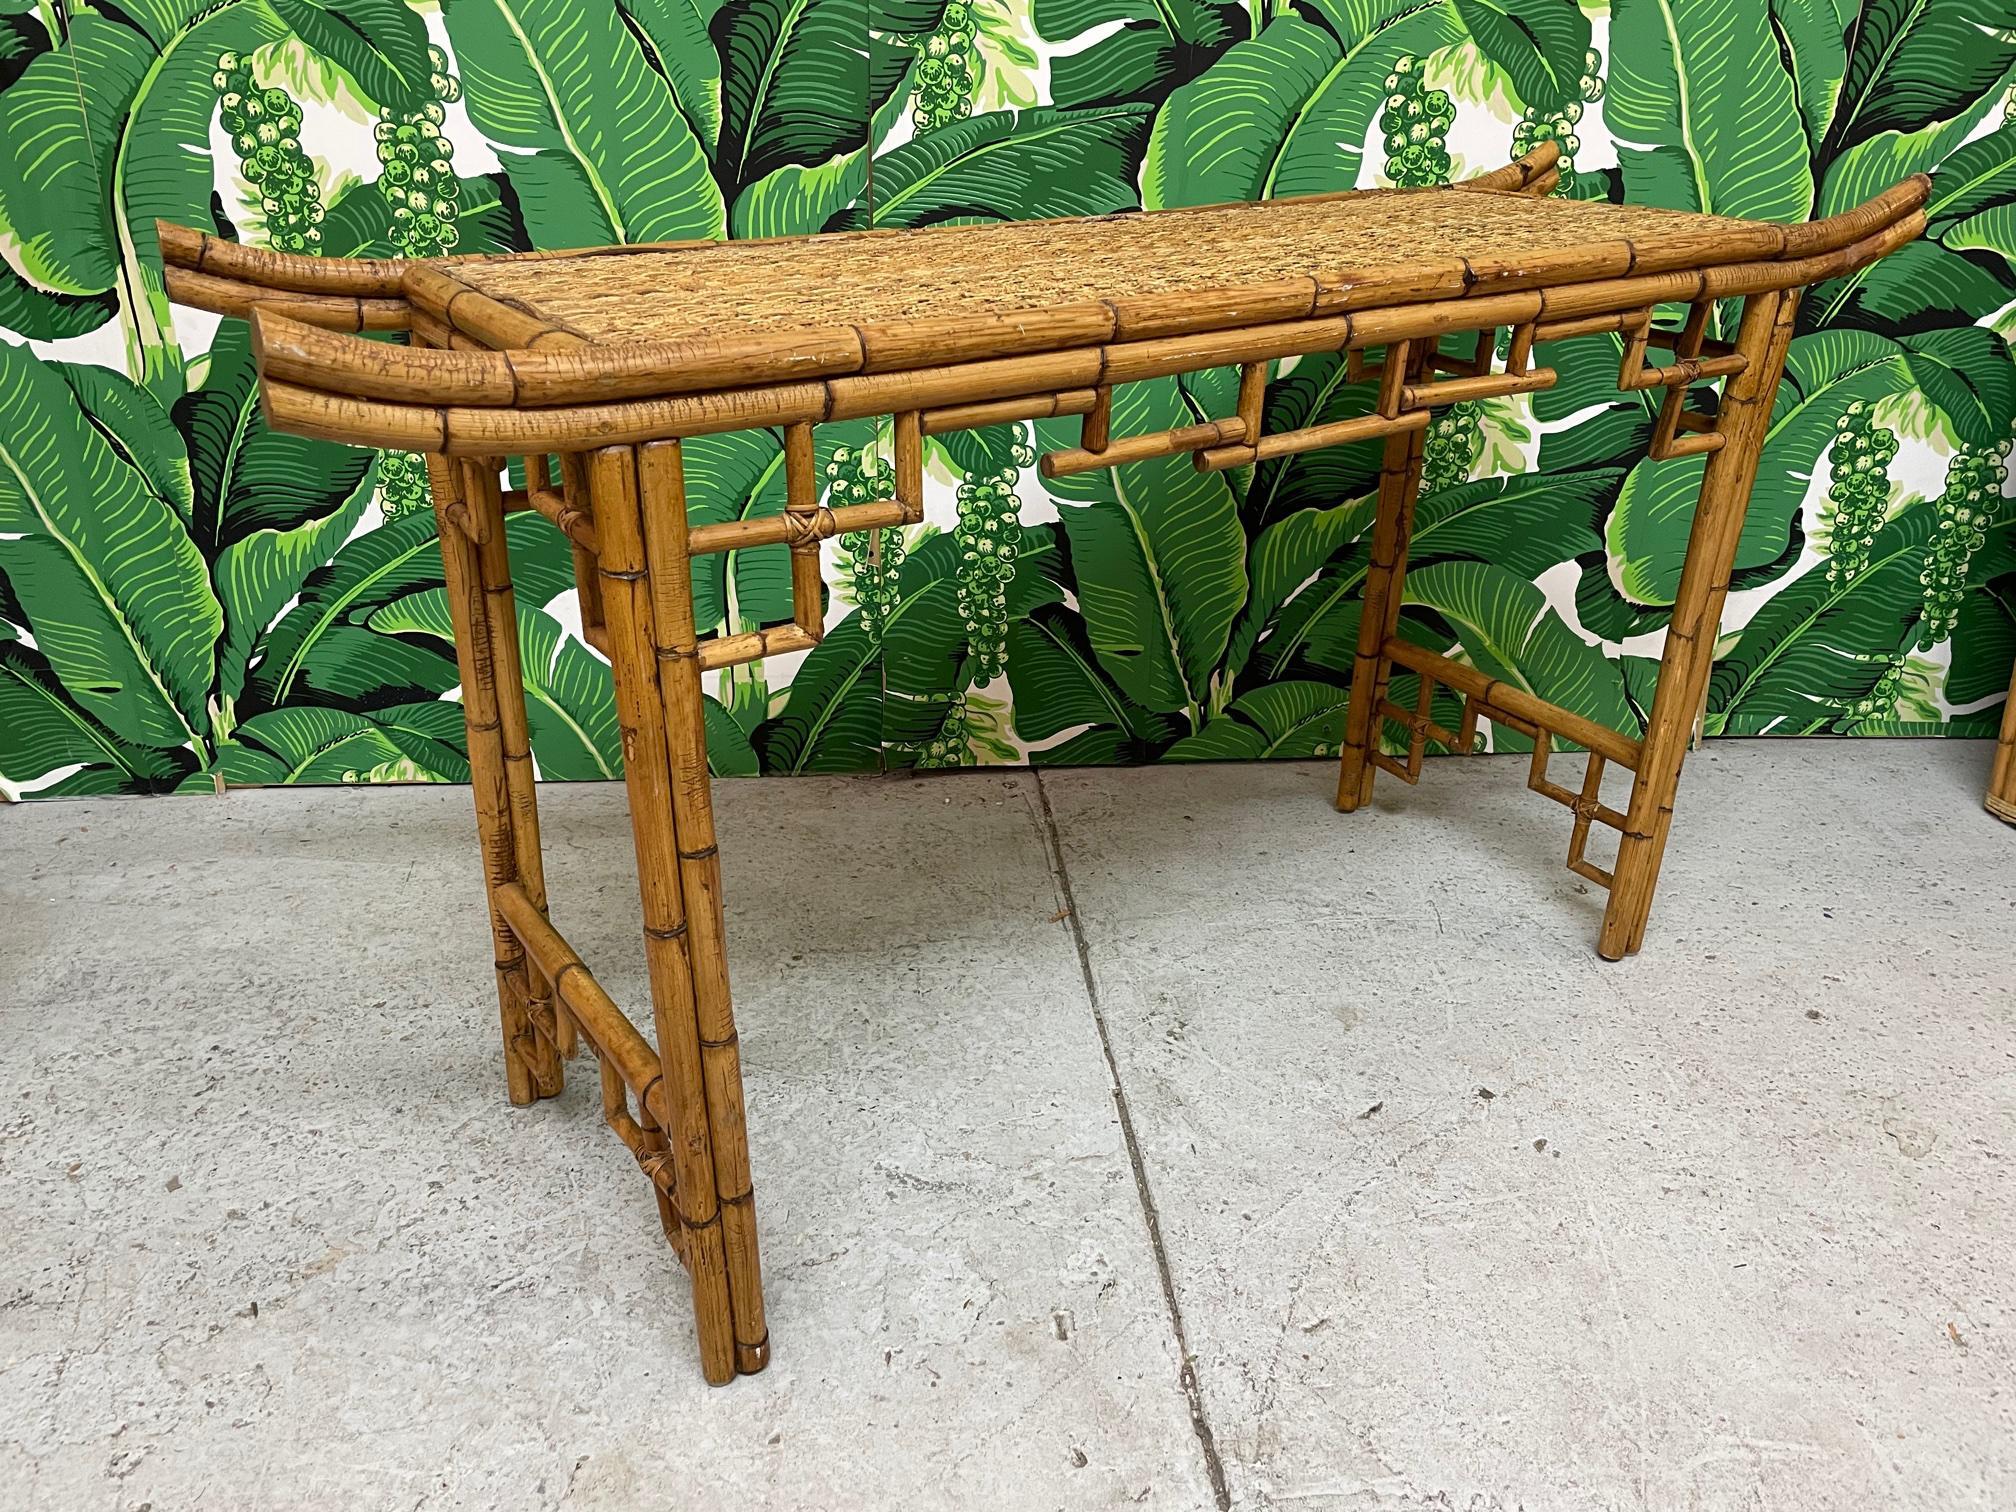 Vintage bamboo console or altar table features Asian chinoiserie styling with everted ends and decorative bamboo apron and spandrels. Top is veneered in woven wicker. Good condition with imperfections consistent with age, see photos for condition